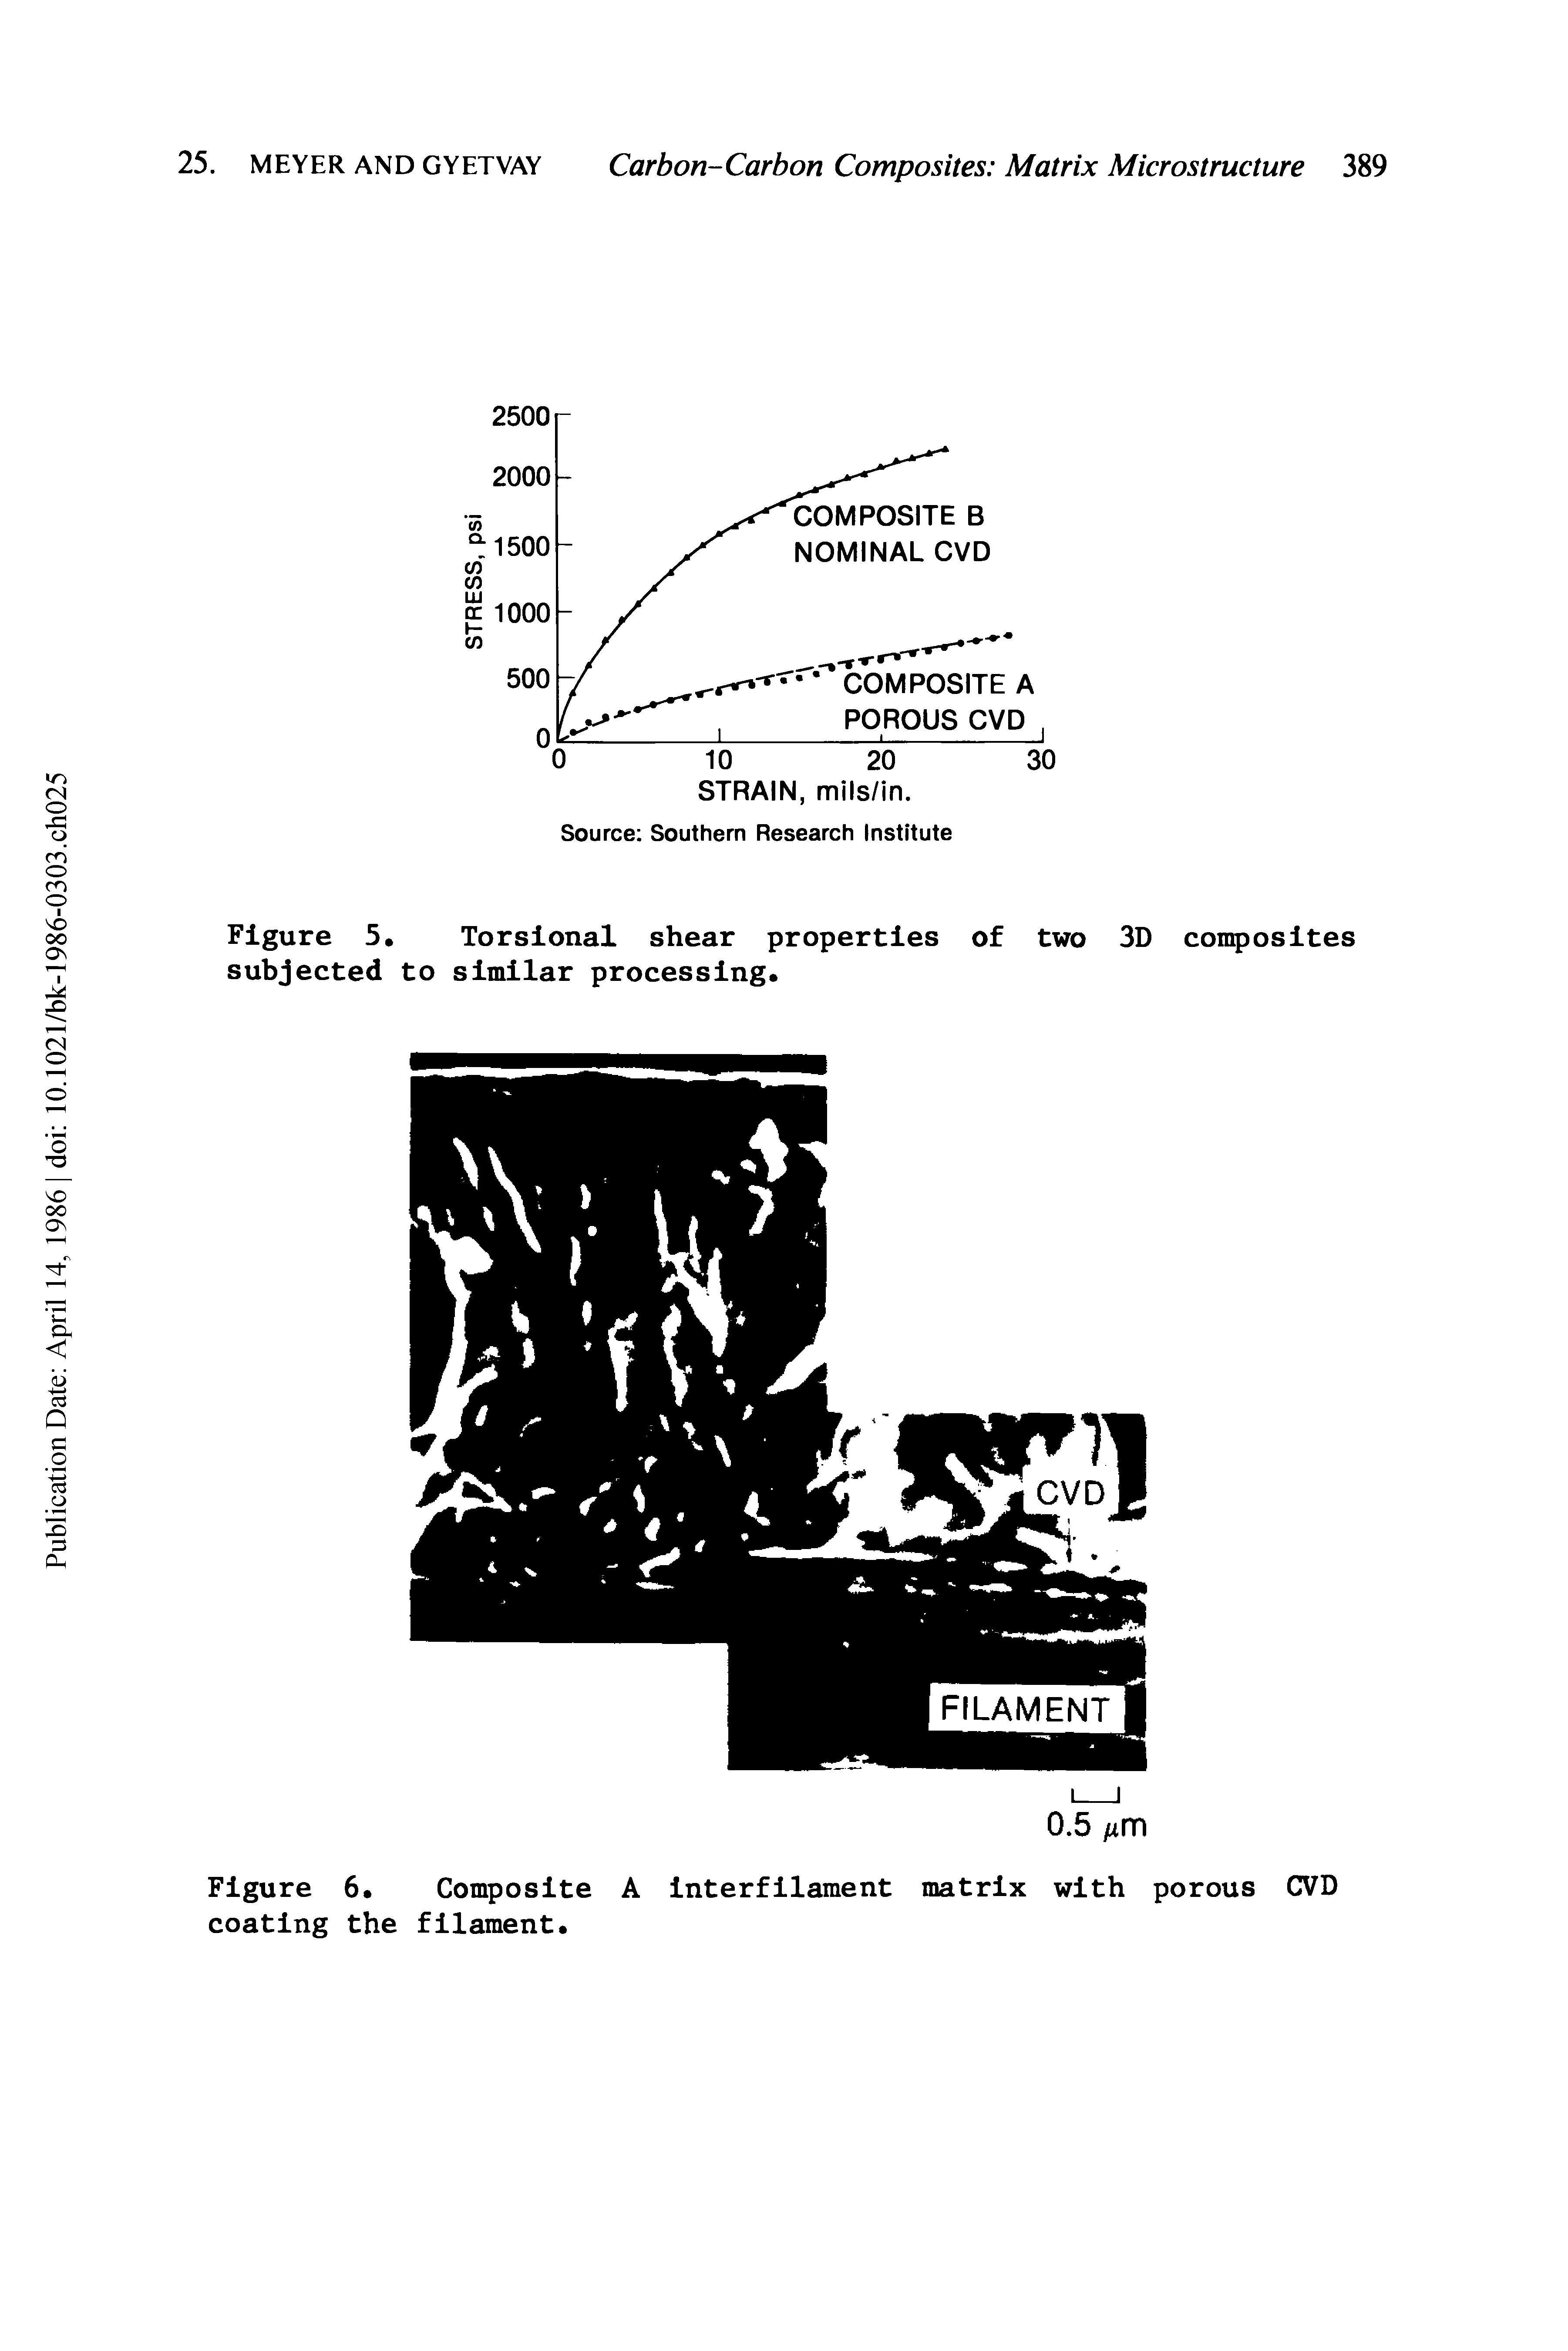 Figure 5. Torsional shear properties of two 3D composites subjected to similar processing.